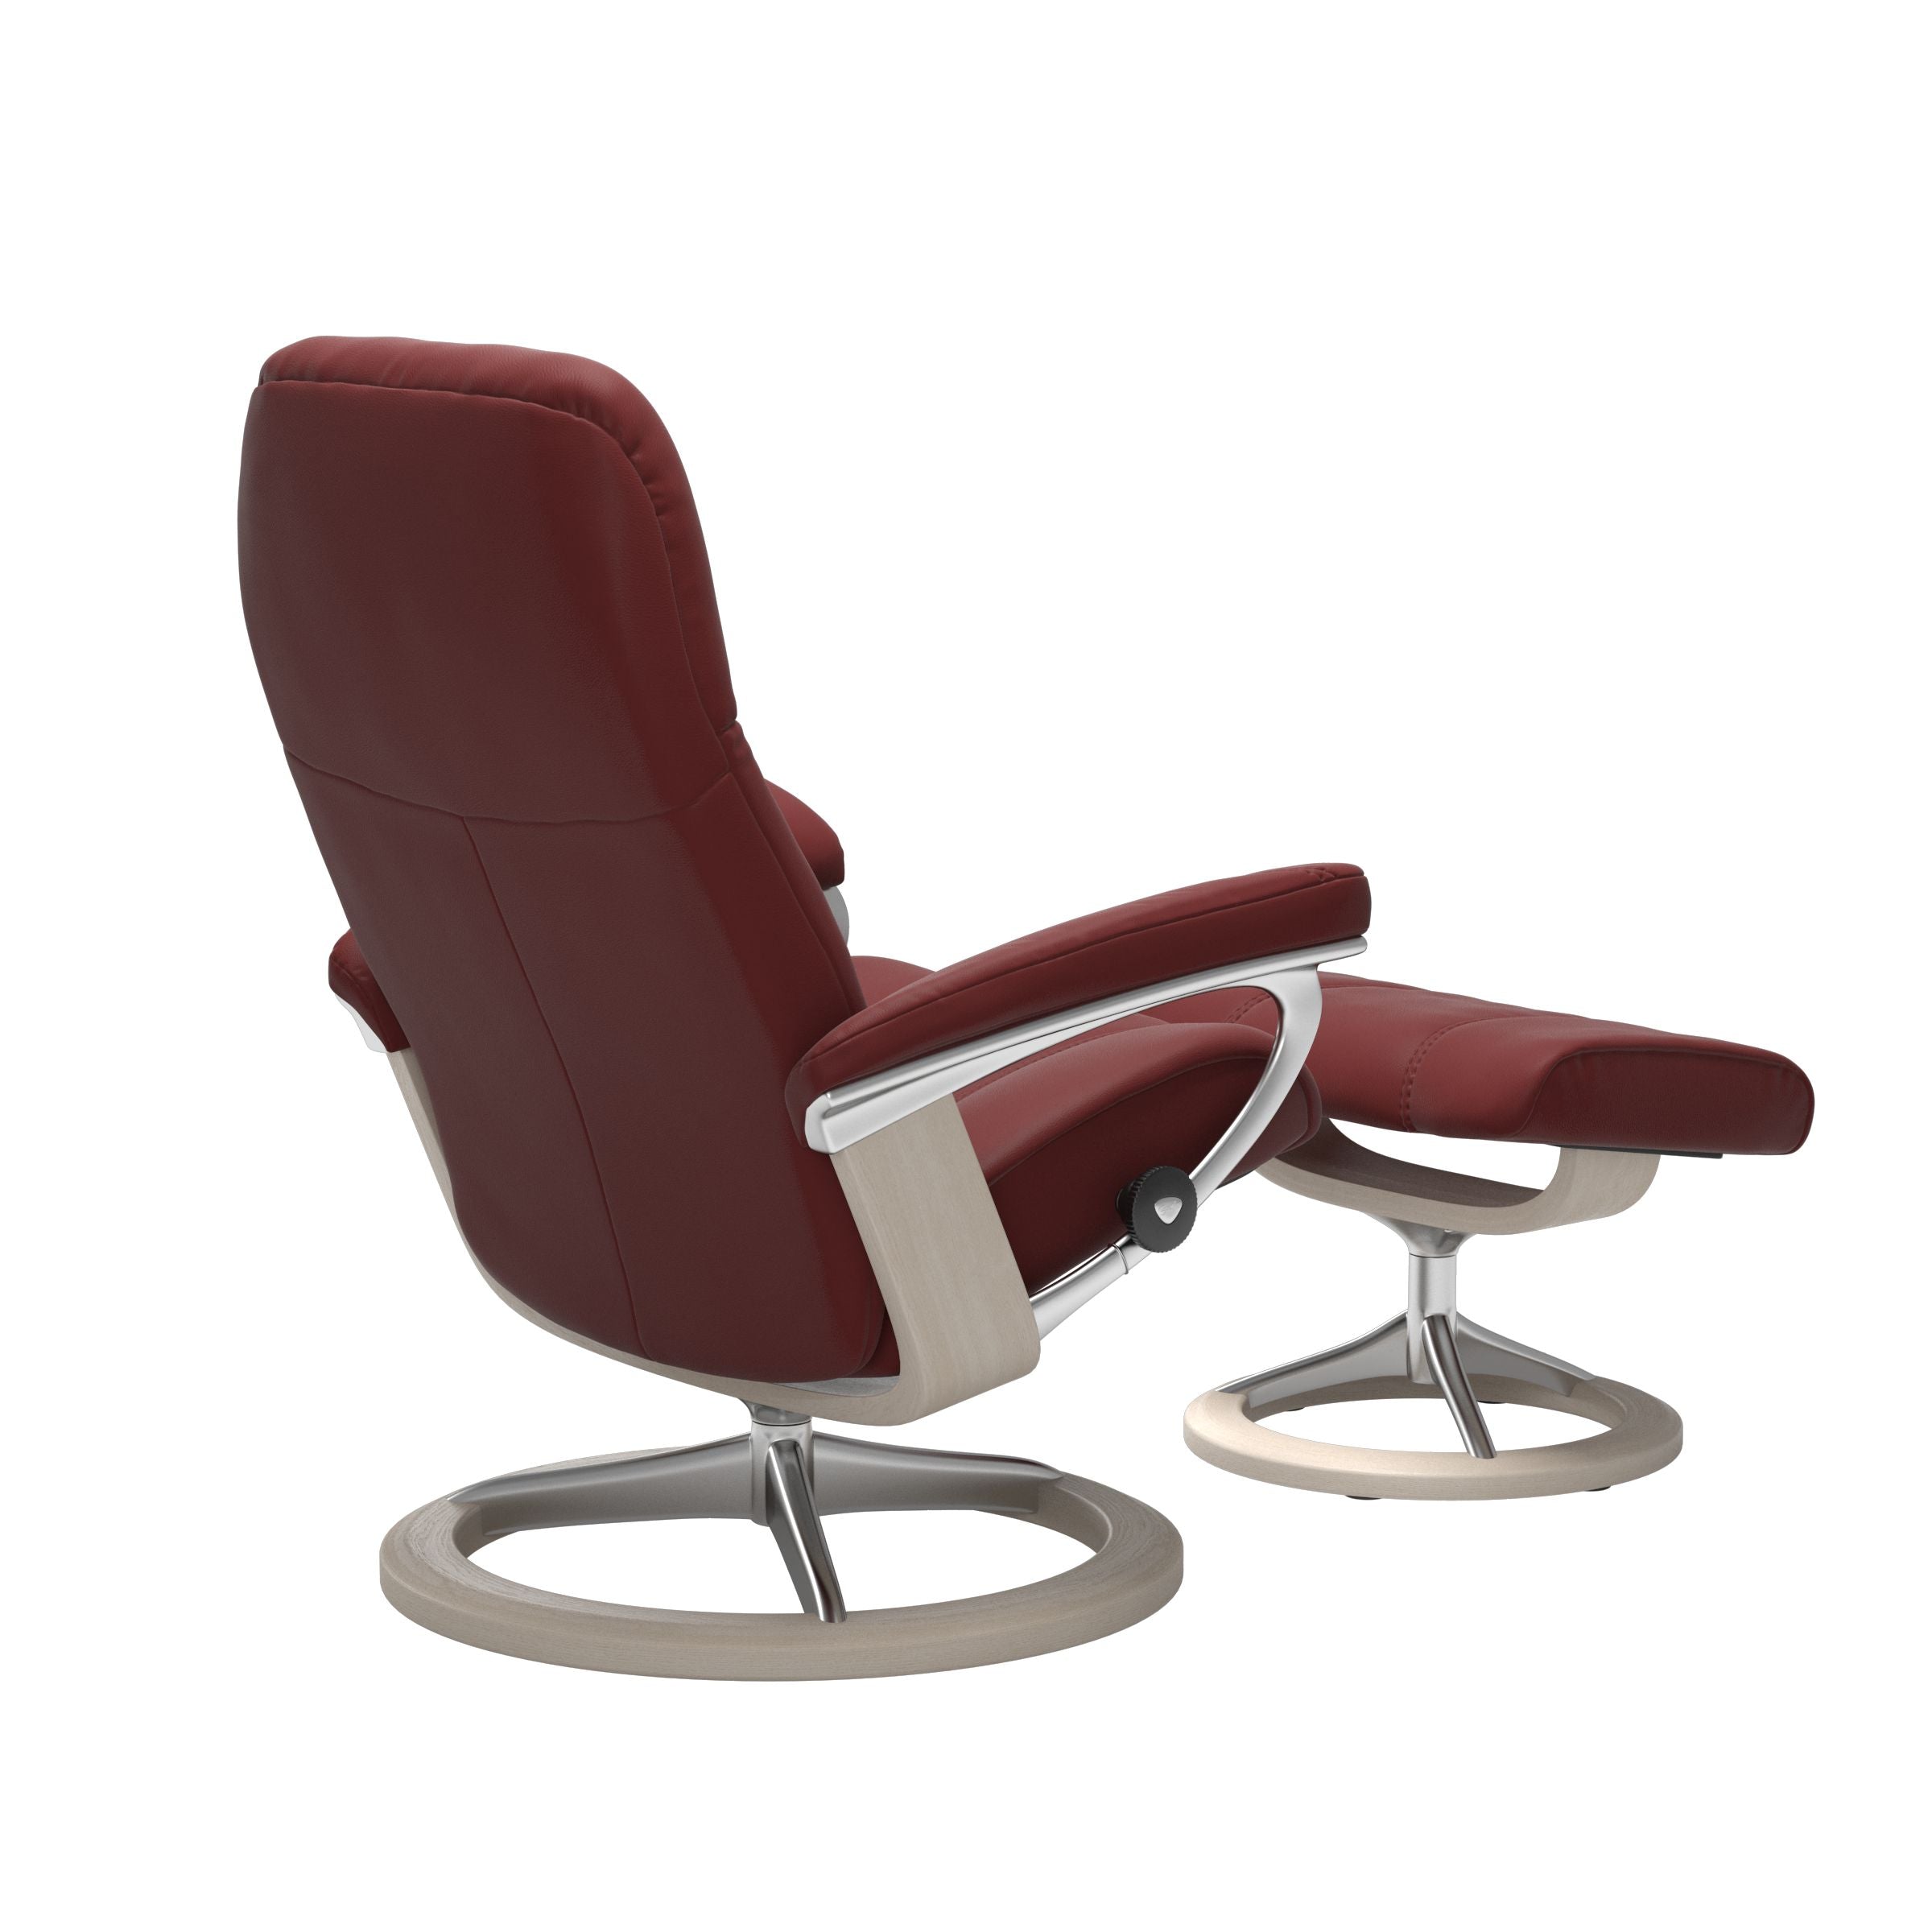 Stressless Consul Signature Leather Chair & Footstool (M)